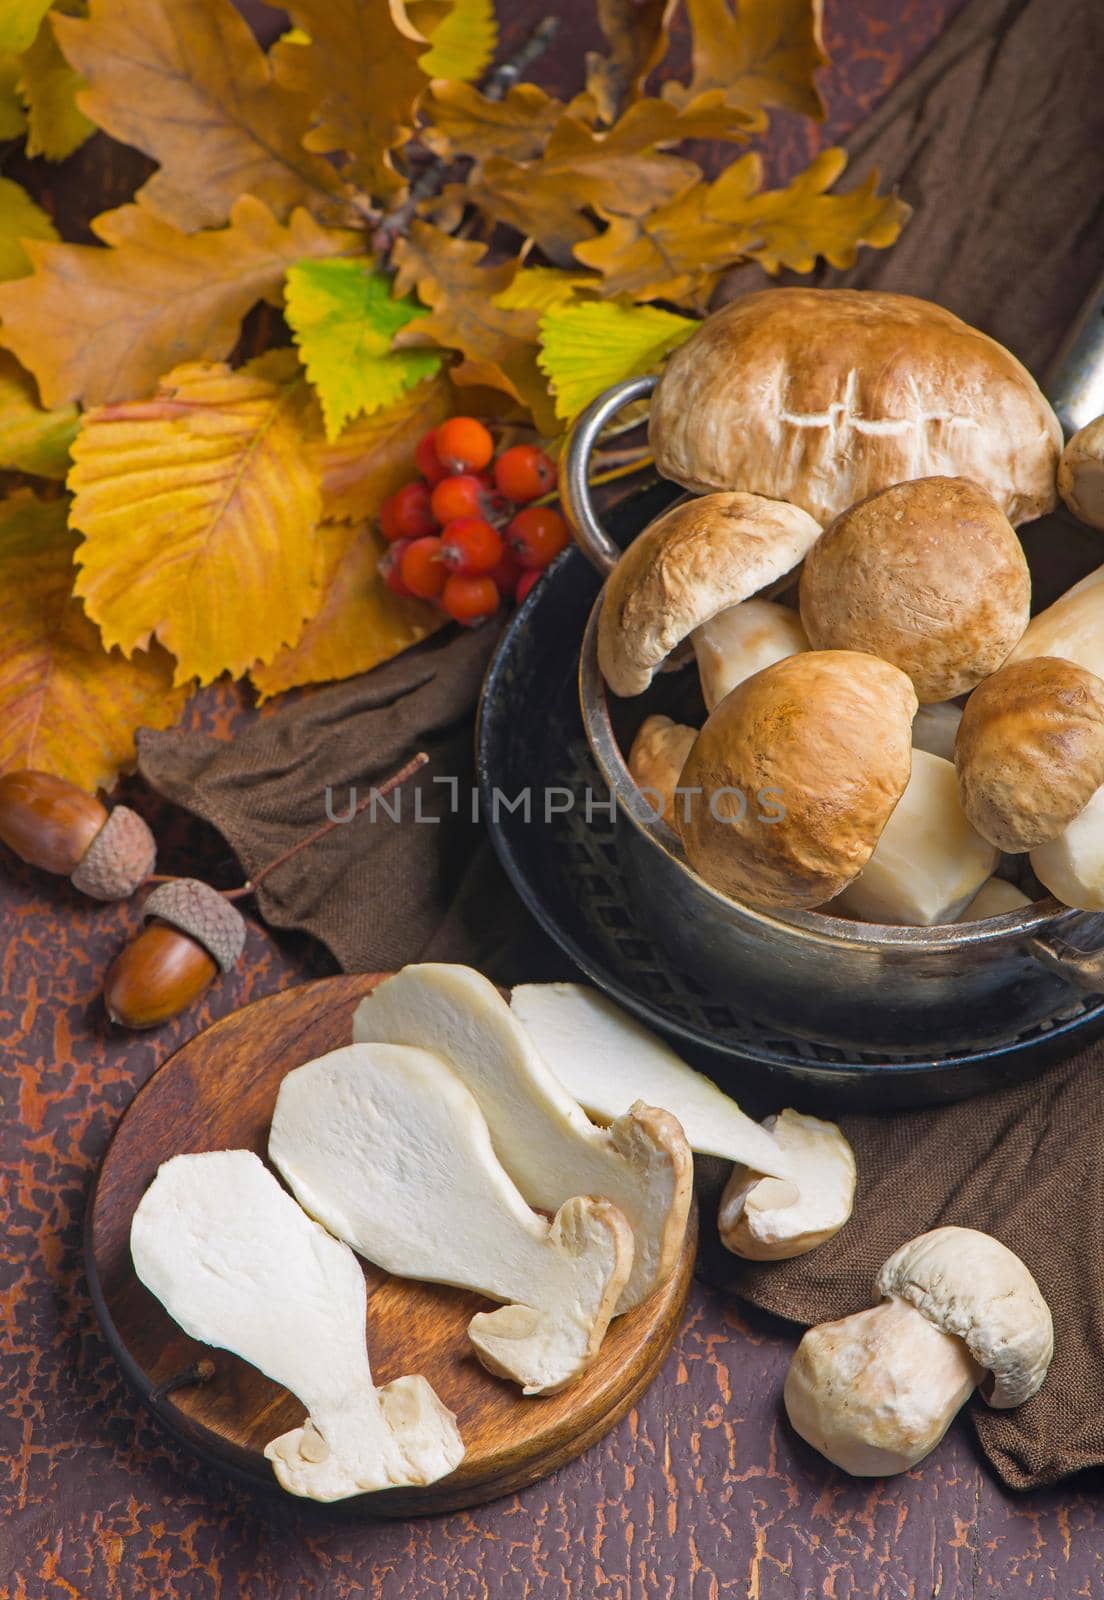 Mushroom Boletus edulis over Wooden Background, close up on wood rustic table. Cooking delicious organic mushroom. Gourmet food by aprilphoto